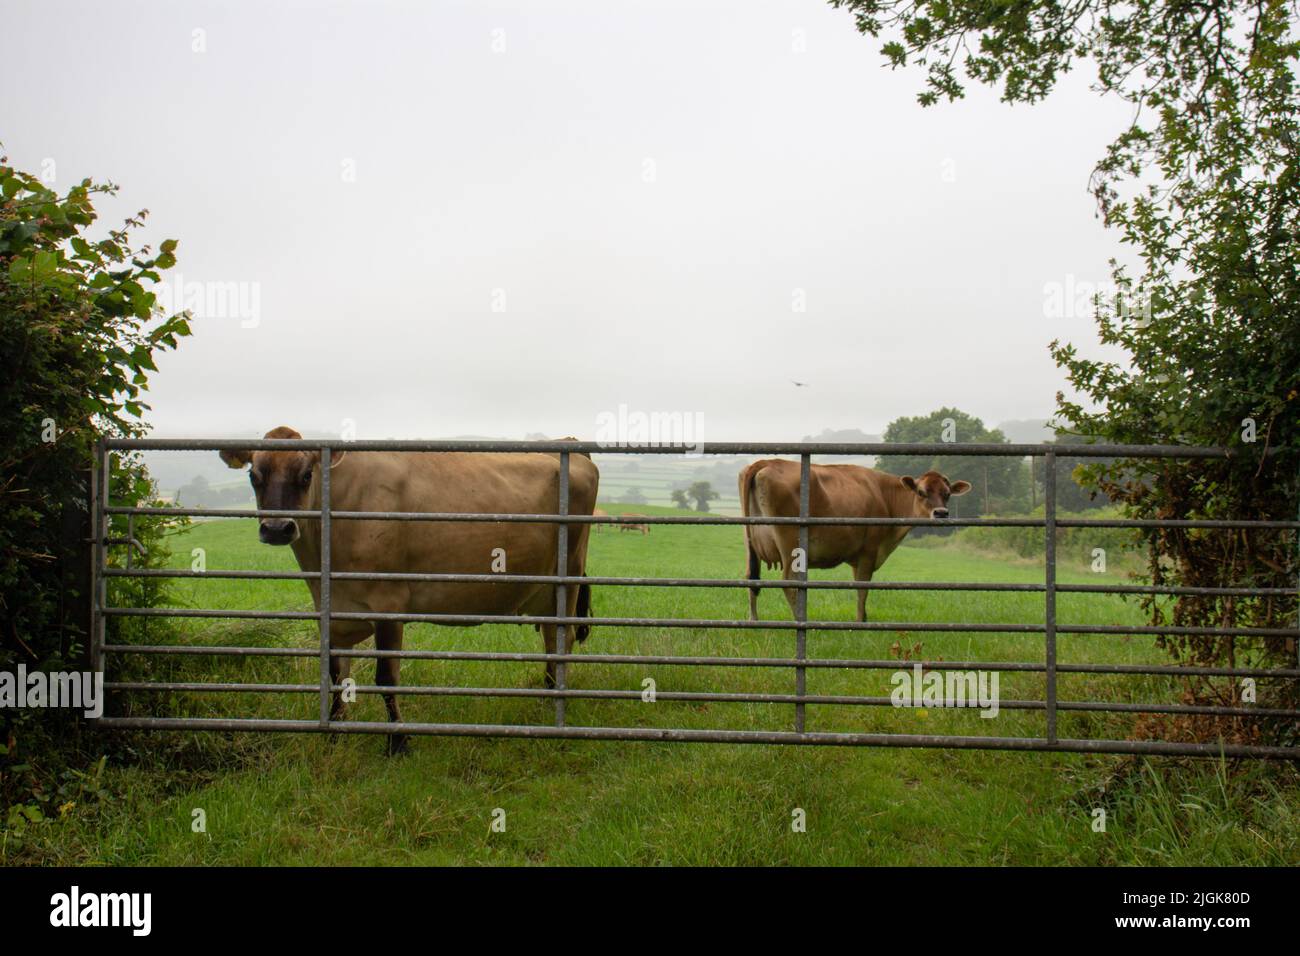 Jersey cattle standing at a metal farm gate in a field of green grass with fog and mist in the background Stock Photo